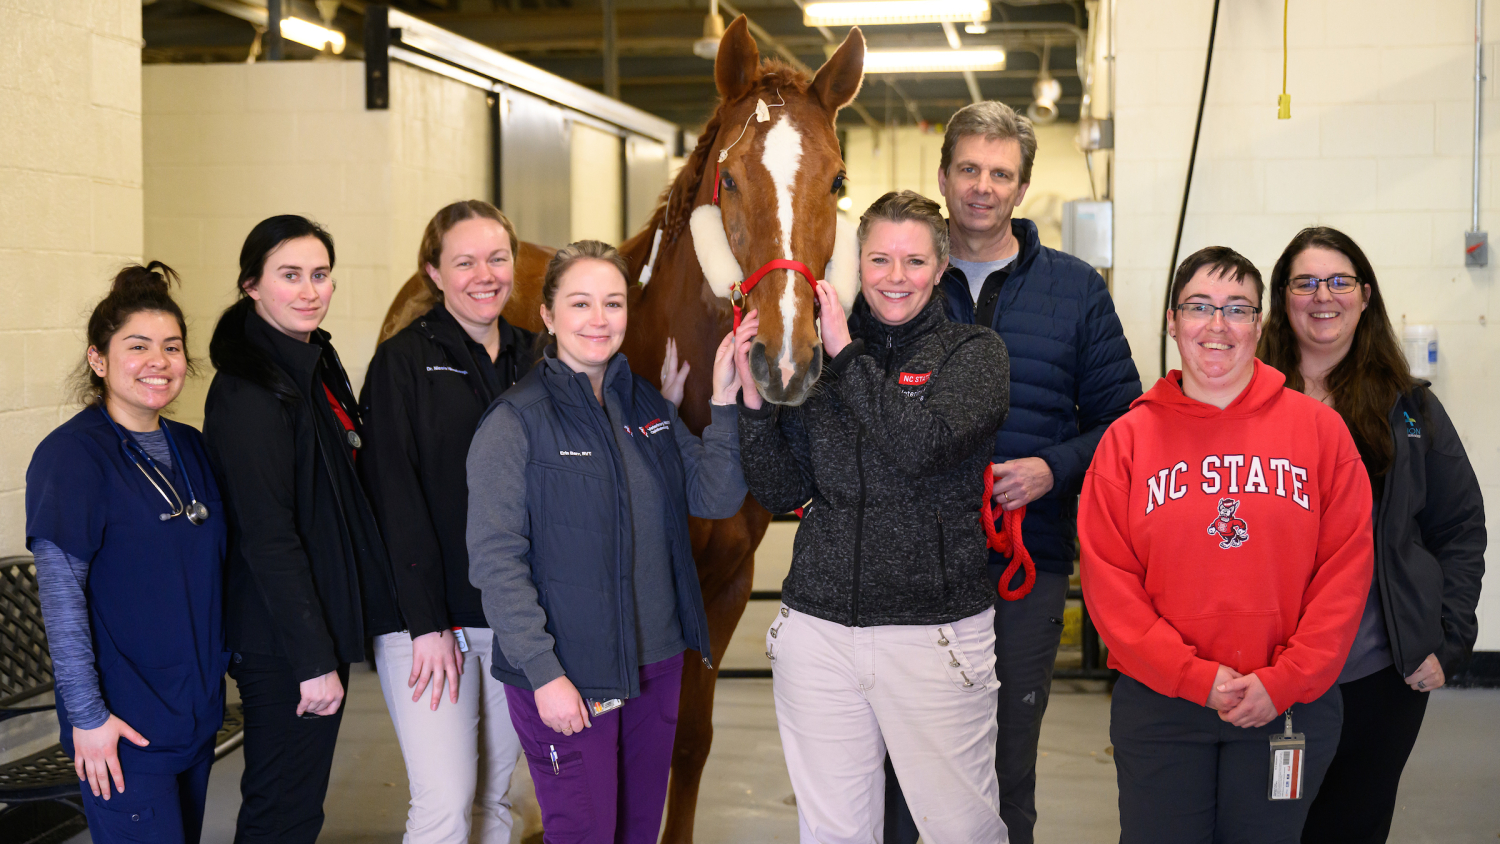 Members of the NC State College of Veterinary Medicine ophthalmology and Large Animal Hospital teams pose with Myra, a brown Dutch warmblood mare.